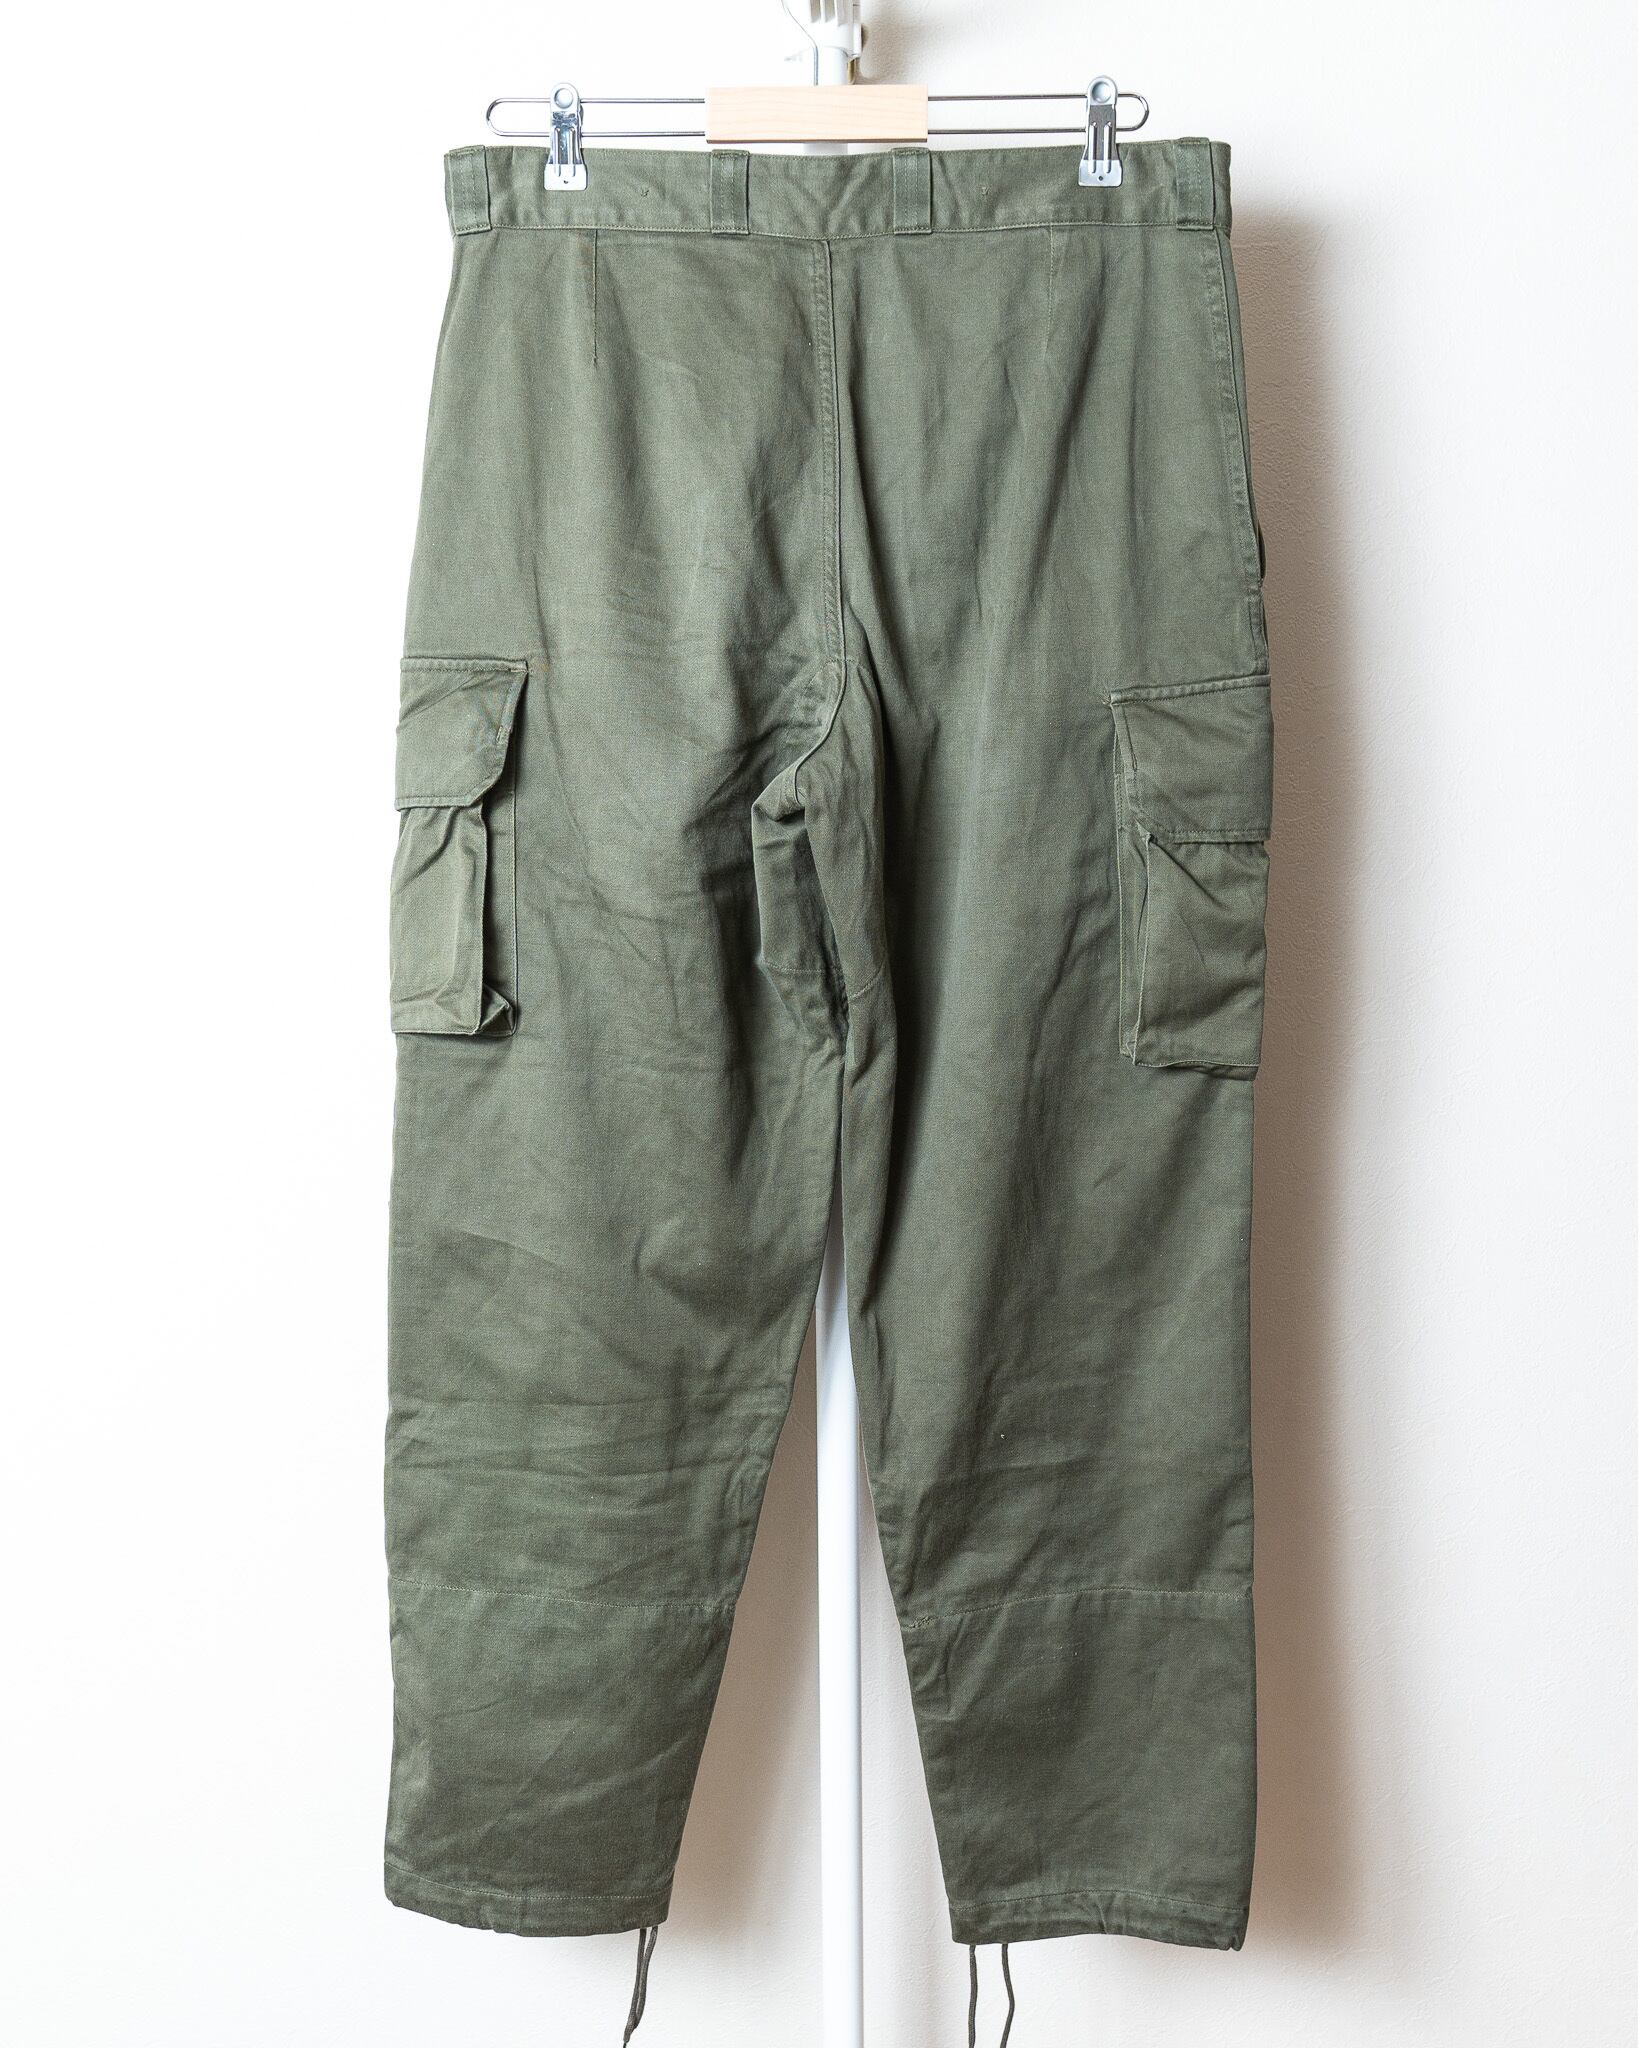 【AランクUsed】French Army M-64 Field Trousers フランス軍 実物